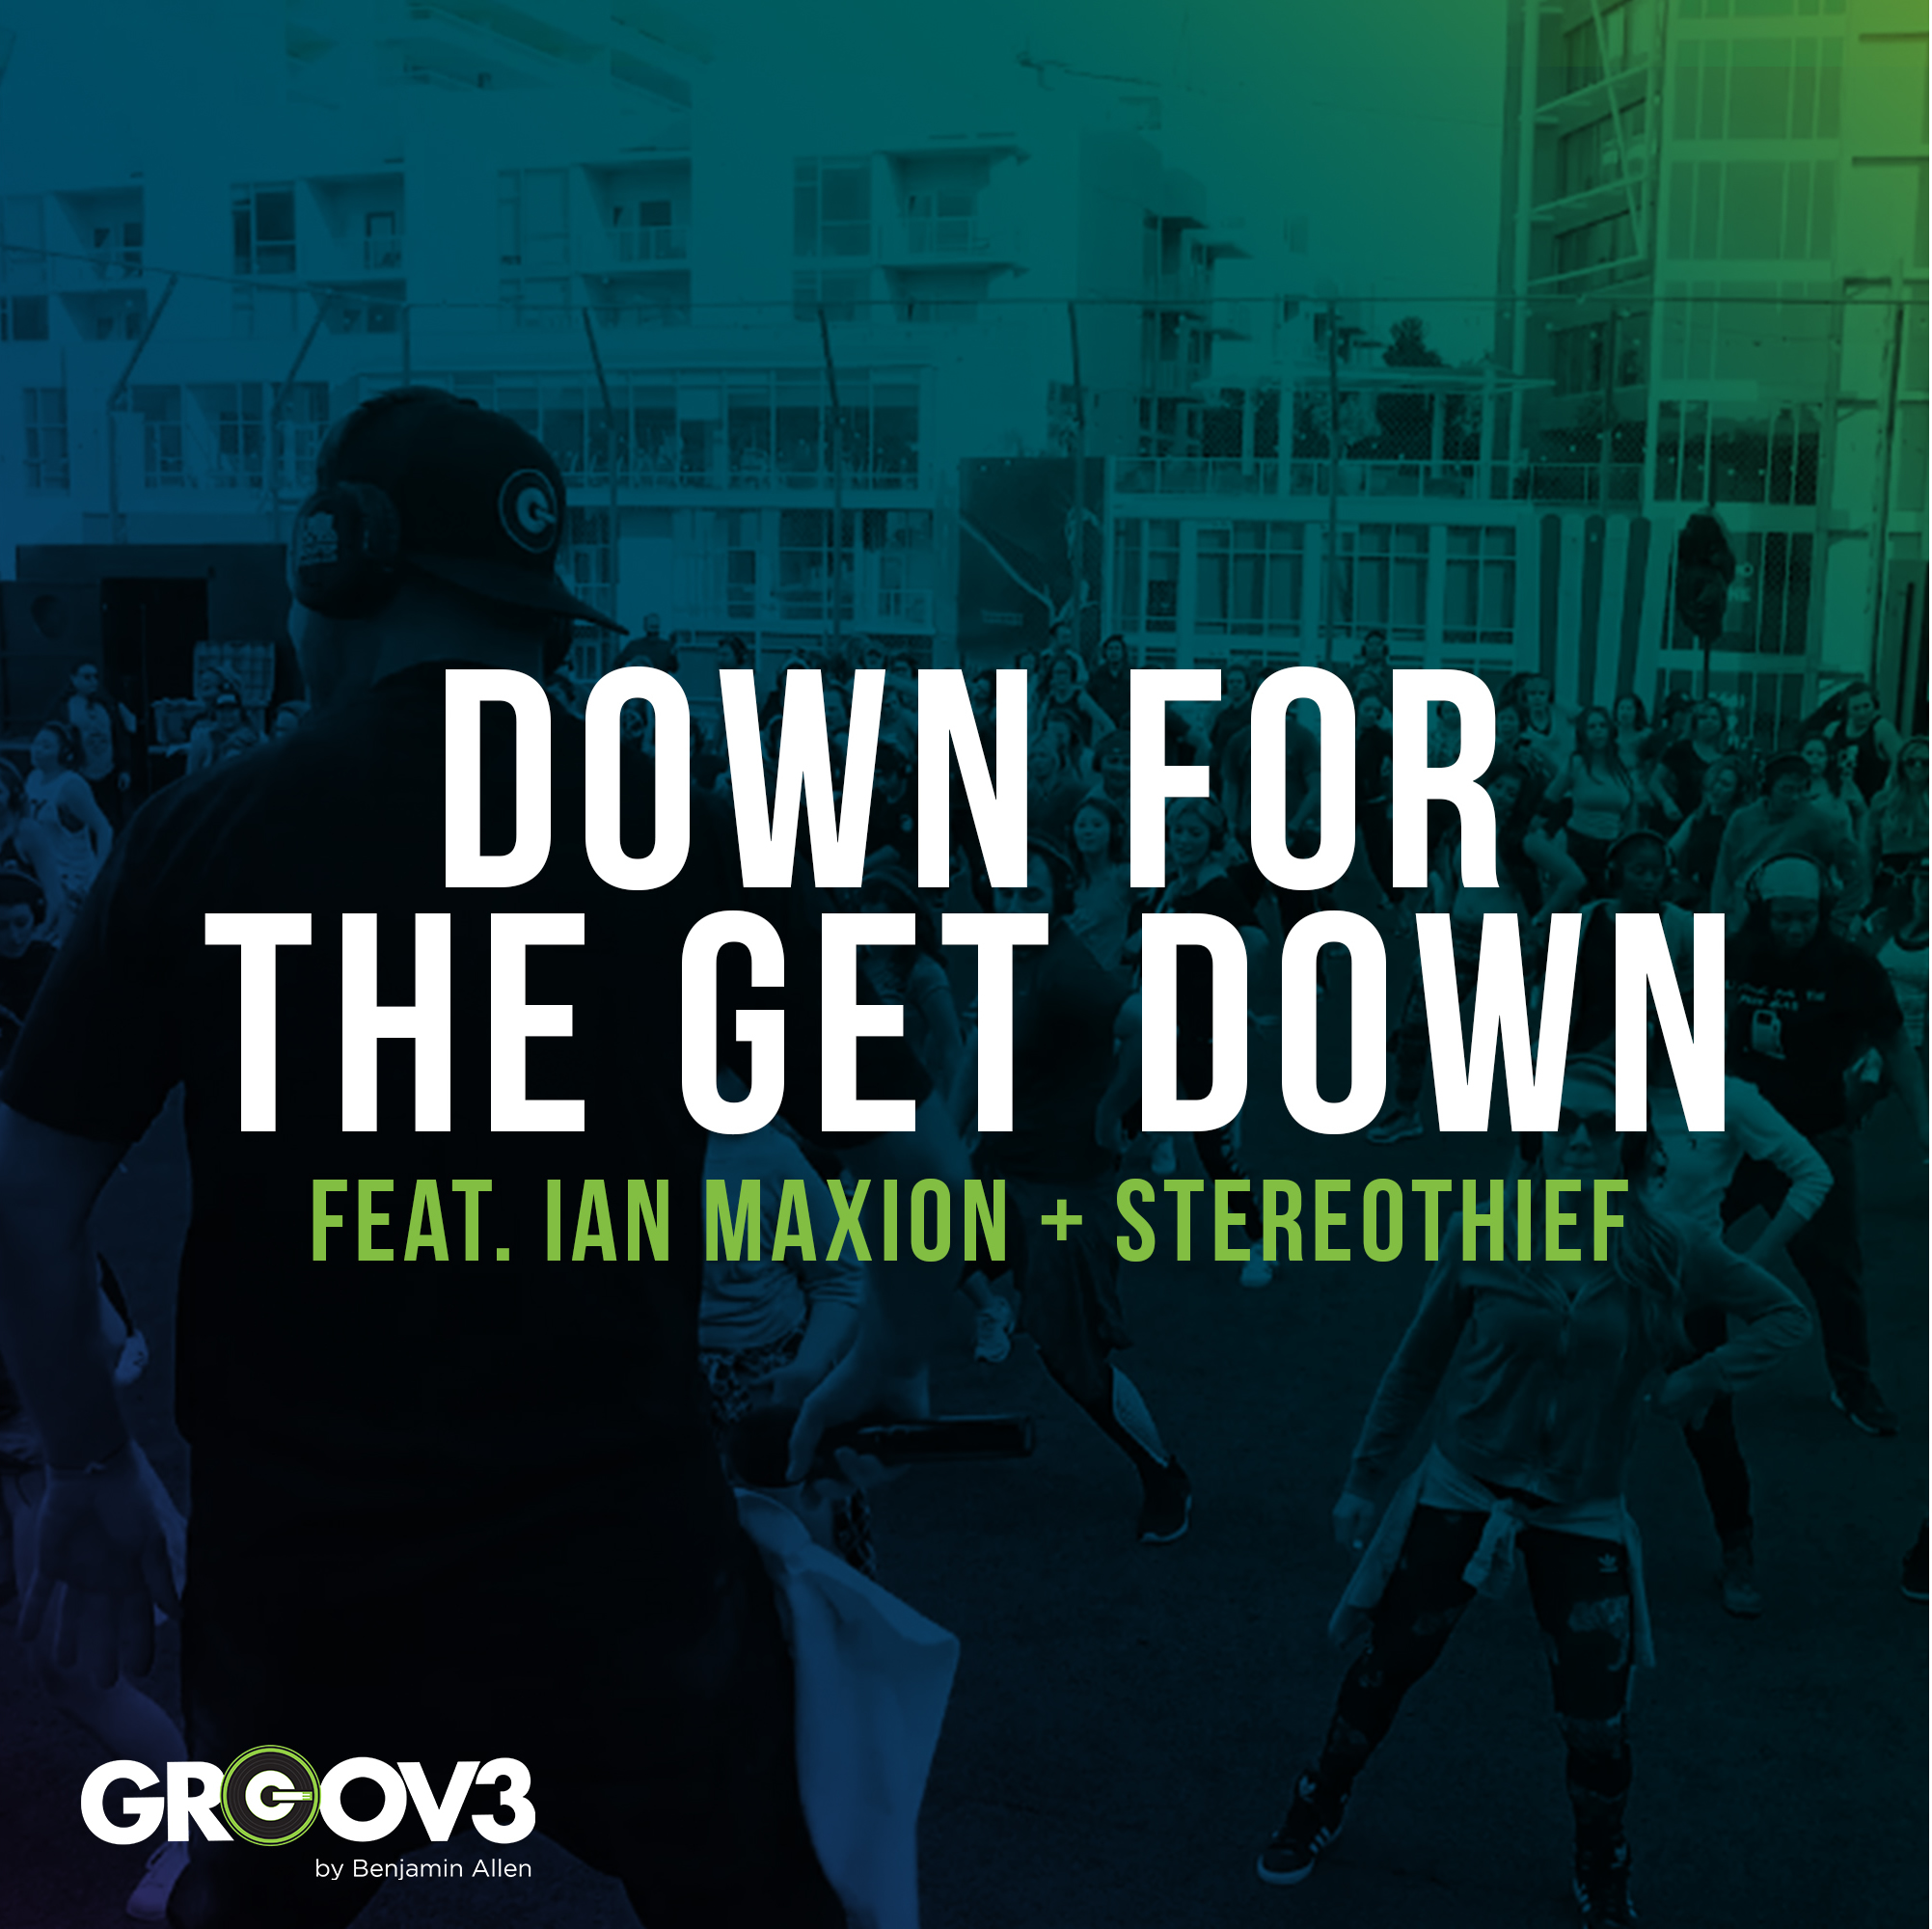 Down For The Get Down